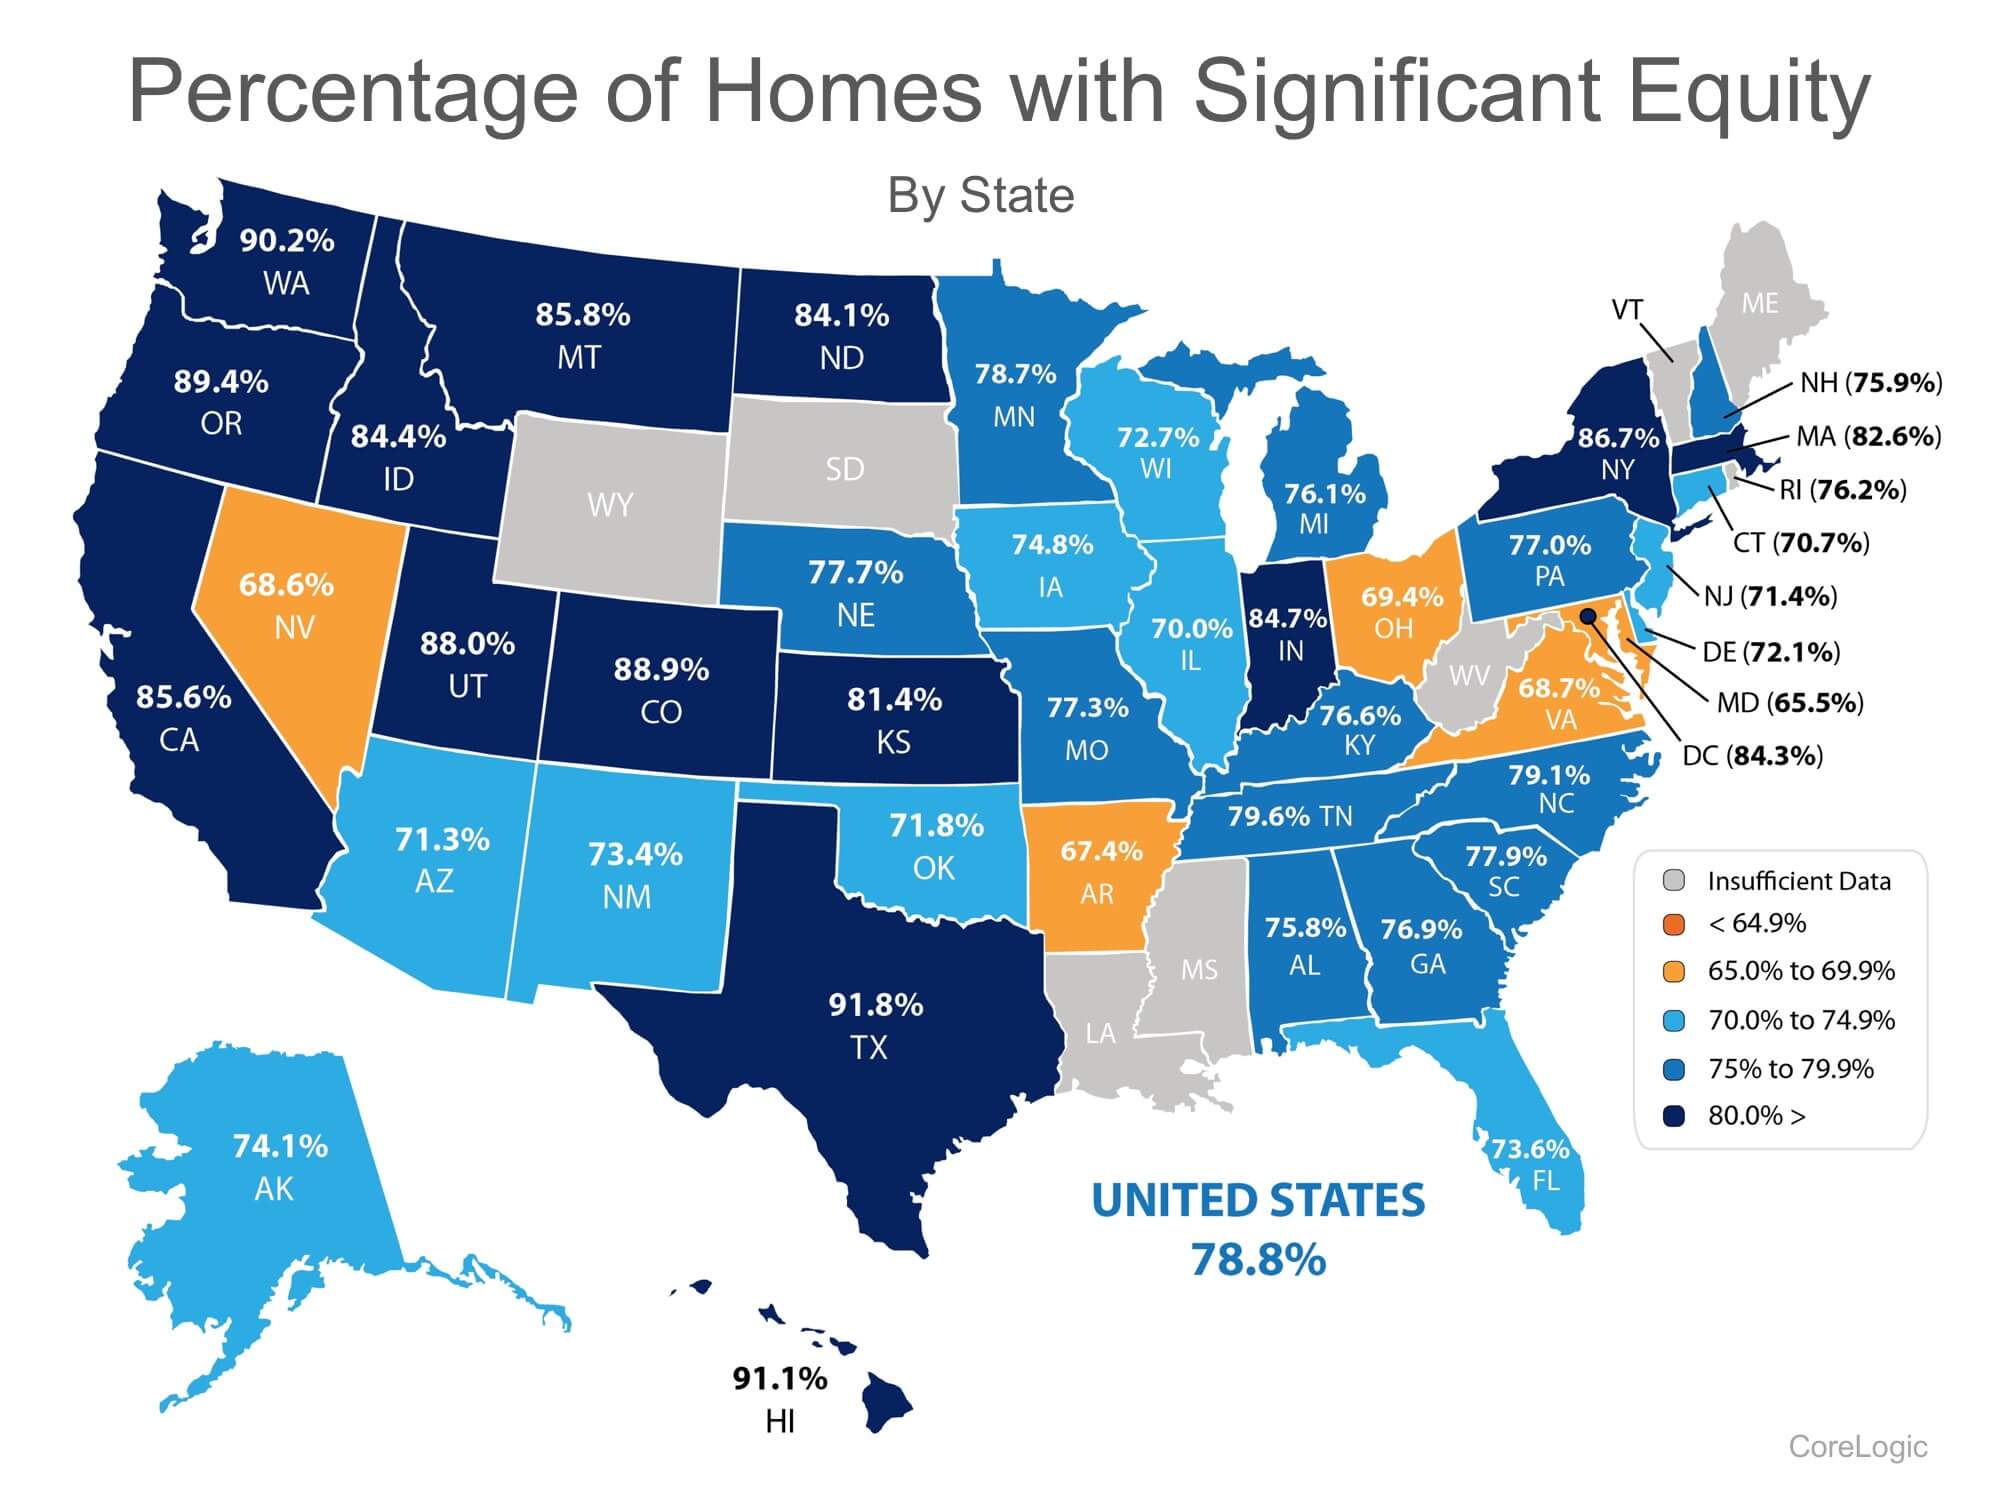 Homeowners have Significant Equity in their homes